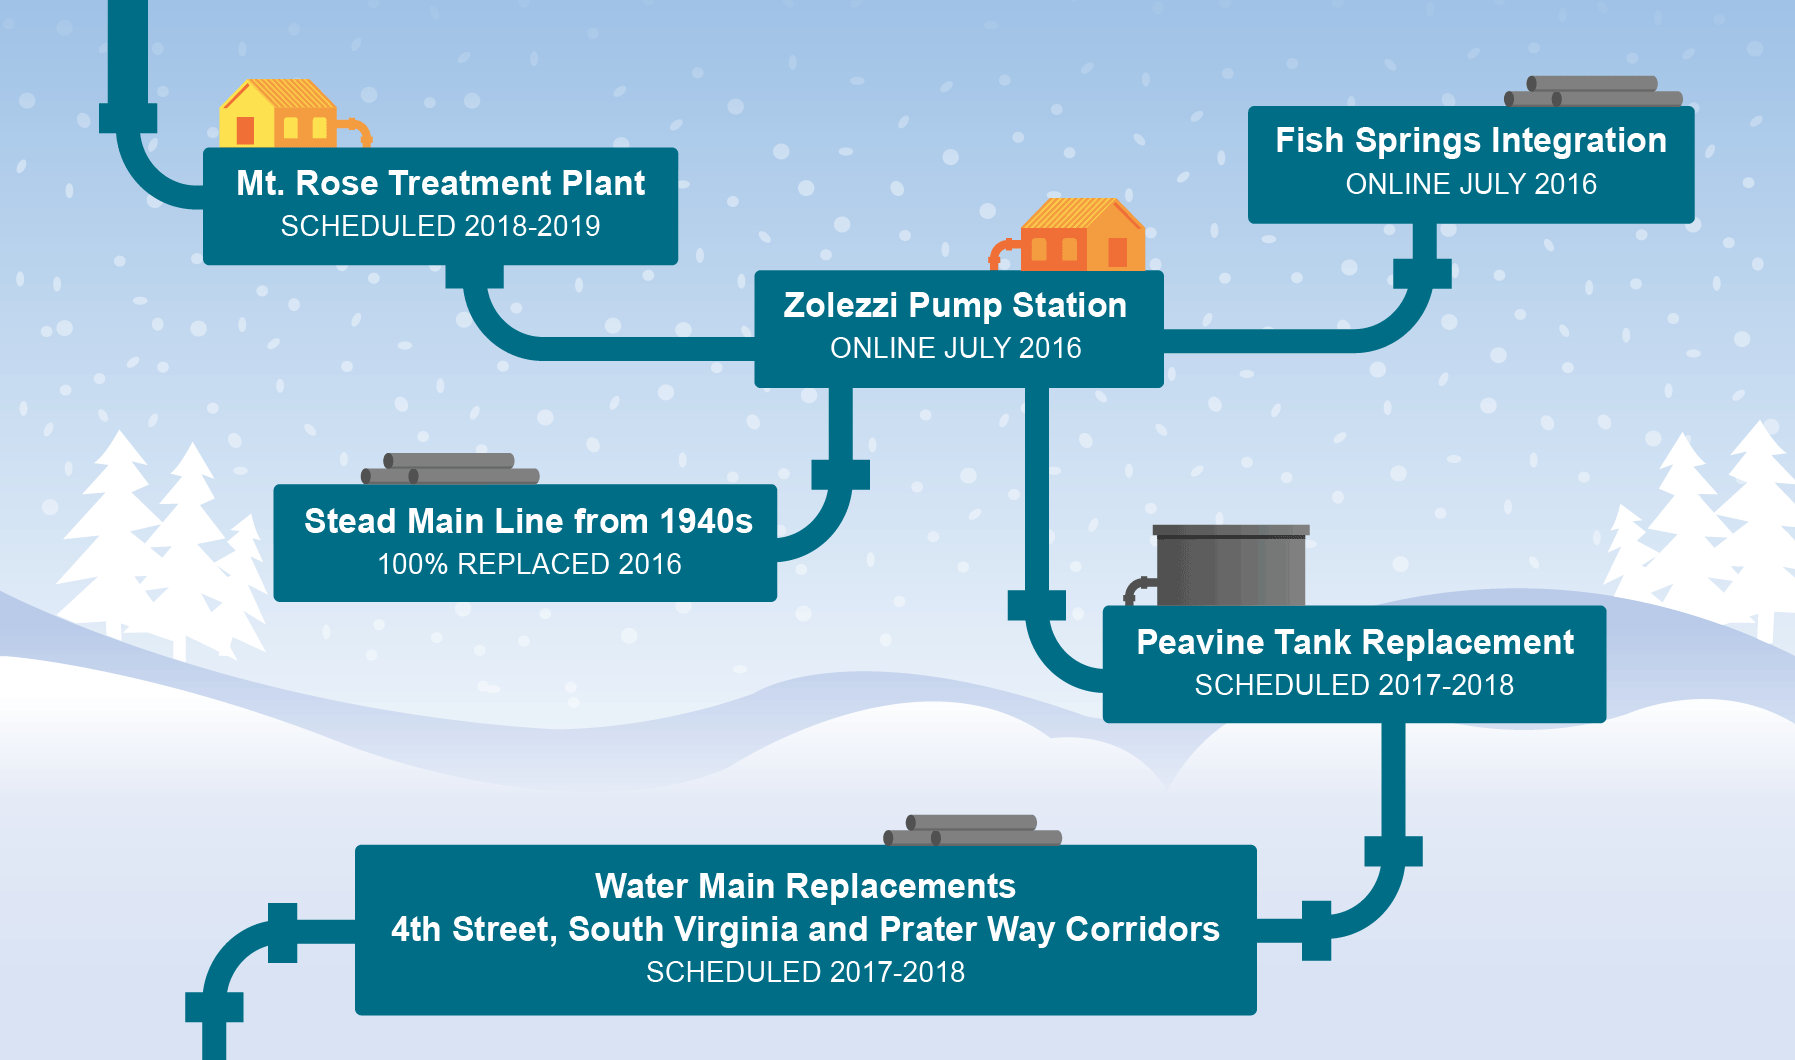 Mt. Rose Treatment Plant: Scheduled 2018-2019 | Fish Springs Integration: Online July 2016 | Zolezzi Pump Station: Online July 2016 | Stead Main Line from 1940s: 100% replaced 2016 | Peavine Tank Replacement: Scheduled 2017-2018 | Water Main Replacements 4th Street, South Virginia and Prater Way Corridors: Scheduled 2017-2018